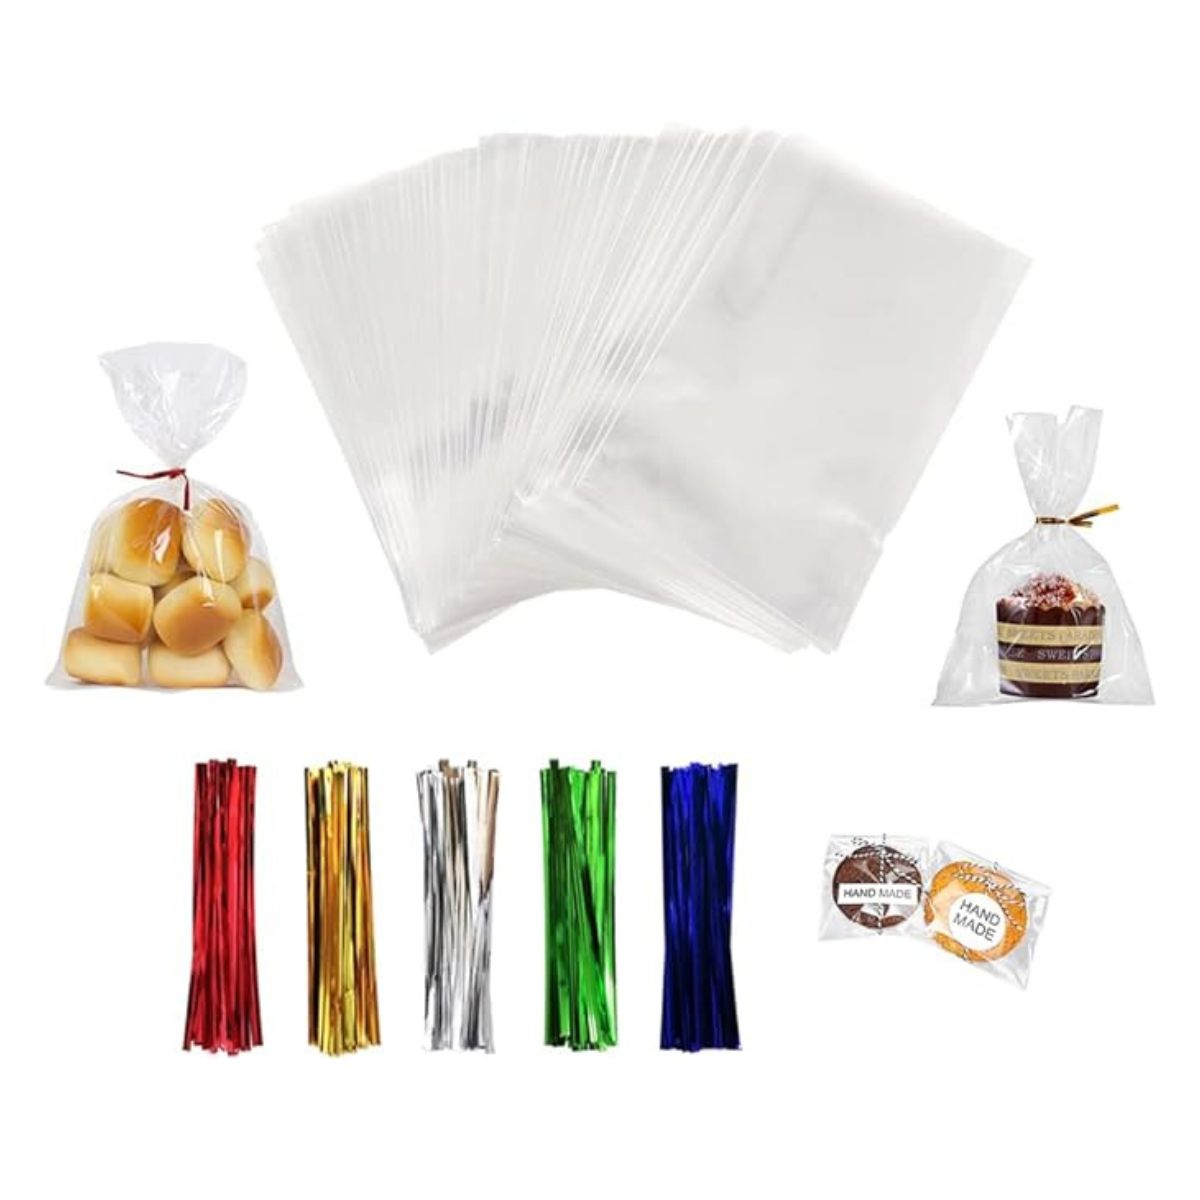 5x7 Inches High-Quality Treat Bags 100 pcs